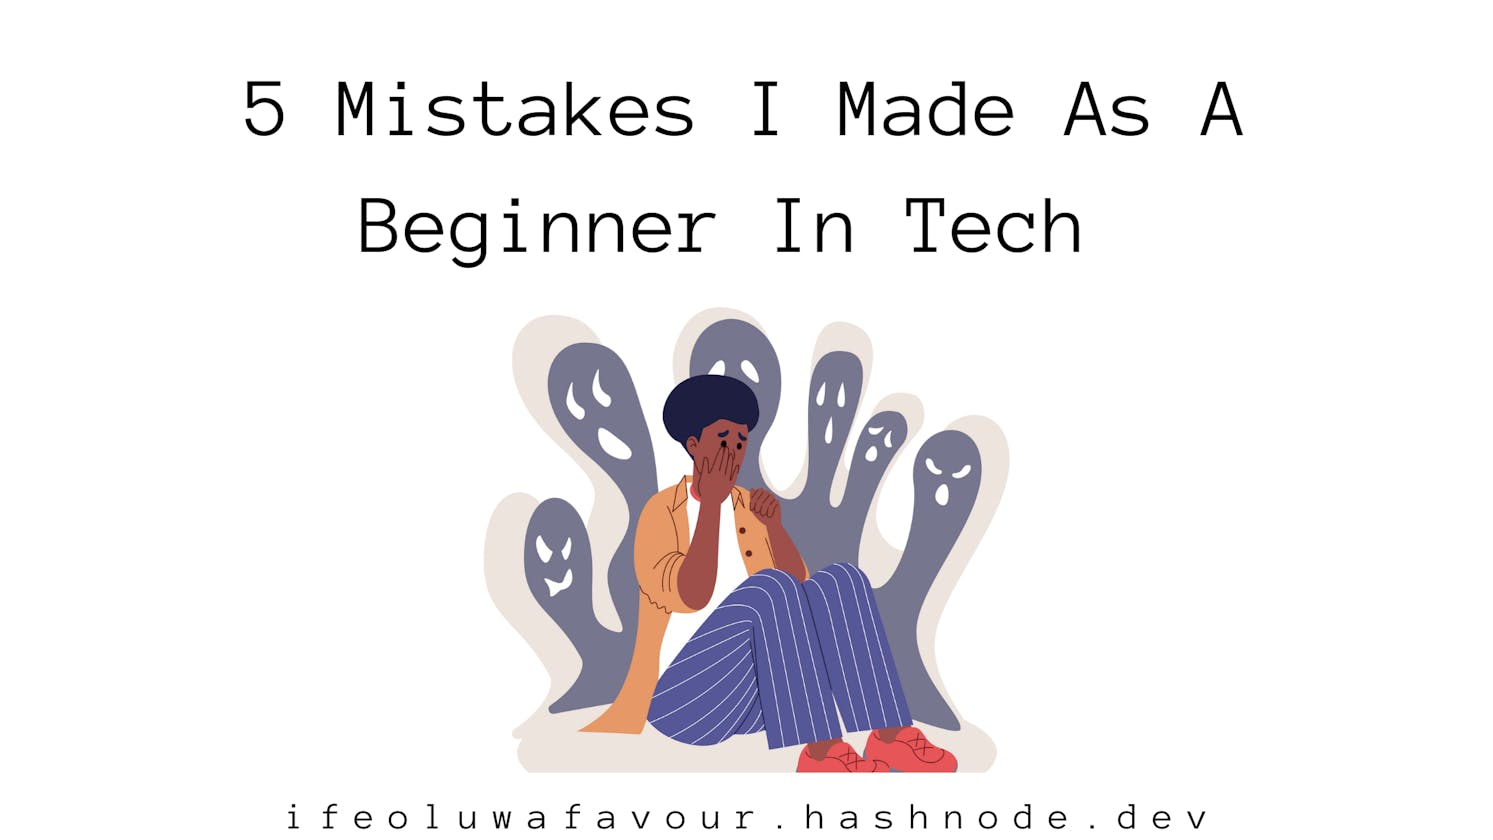 5 Mistakes I Made As A Beginner in Tech